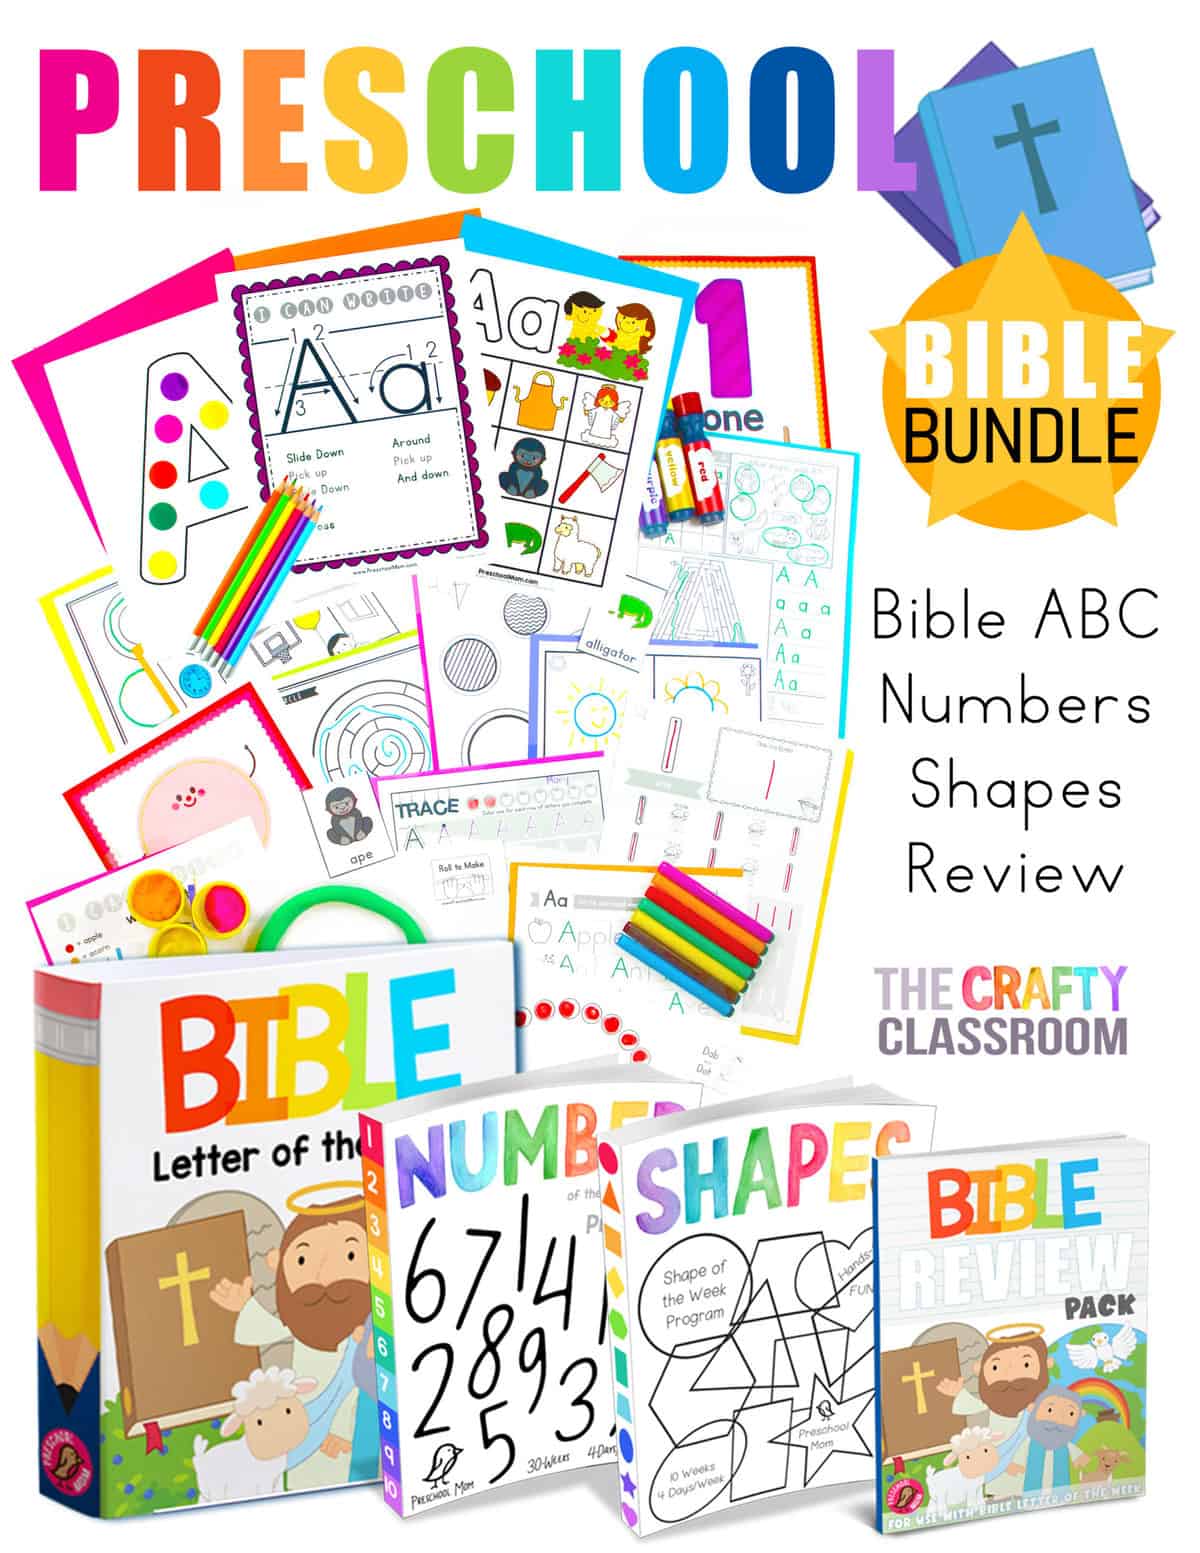 Printable Crafts for Kids Handouts  Sunday school crafts, Sunday school  crafts for kids, Bible crafts